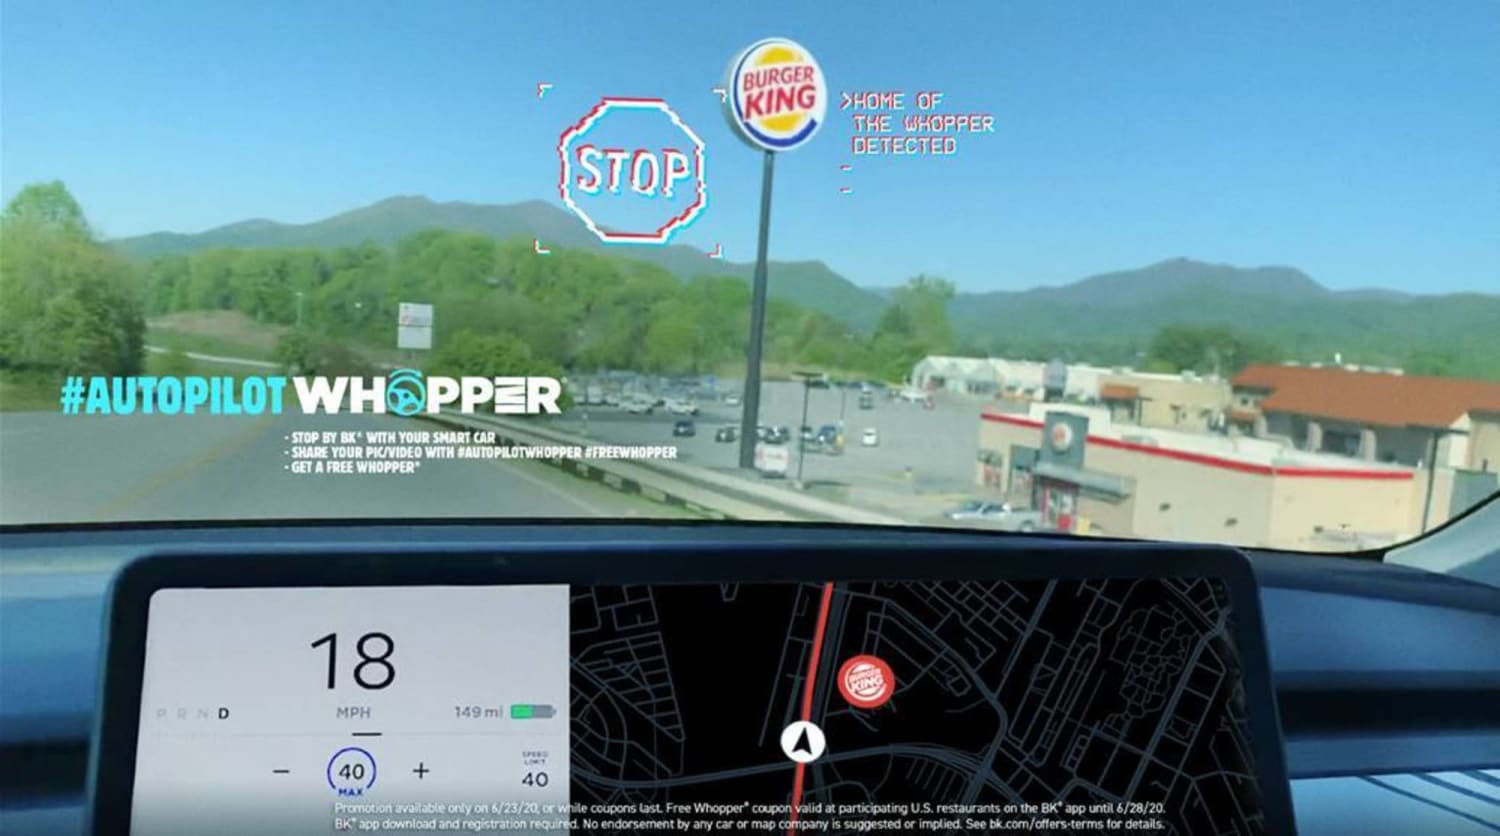 Smart cars make intelligent choice to stop for Burger King